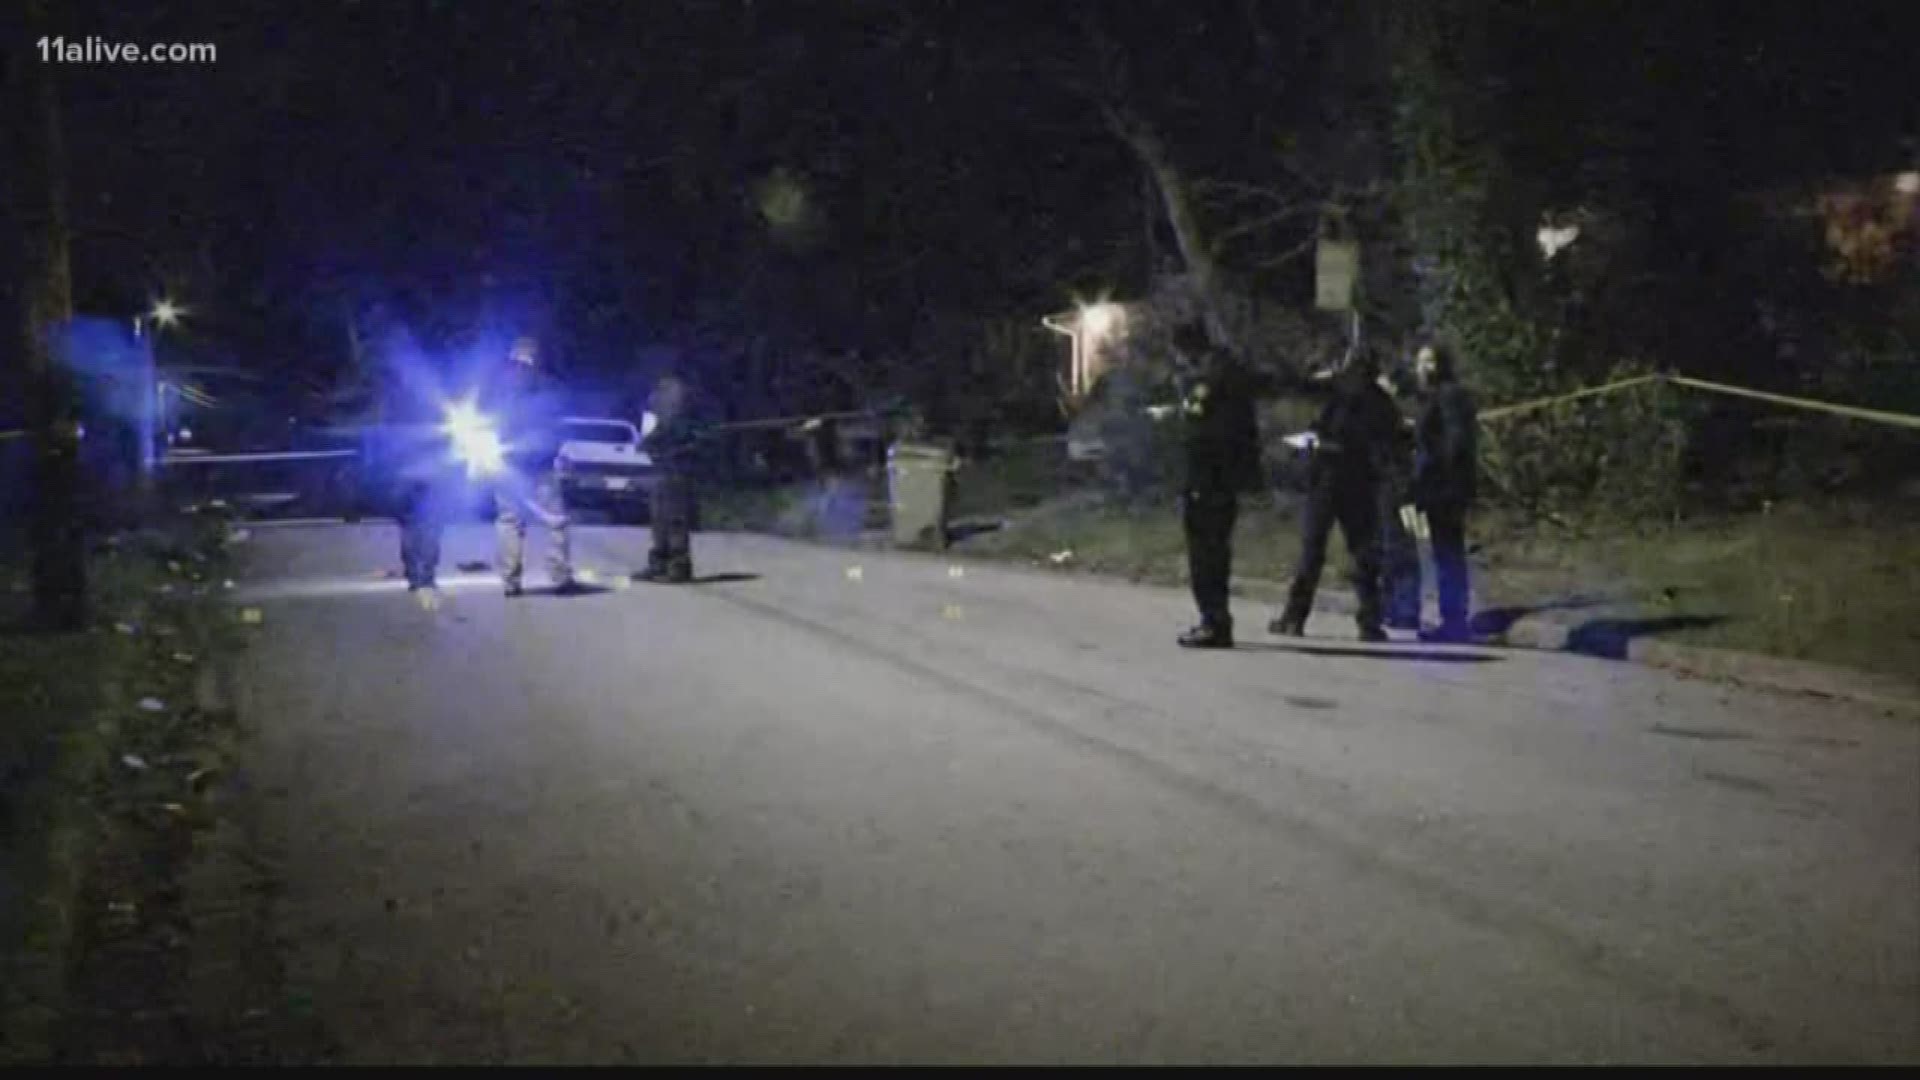 A 16-year-old has died after being shot in southeast Atlanta on Thursday night.